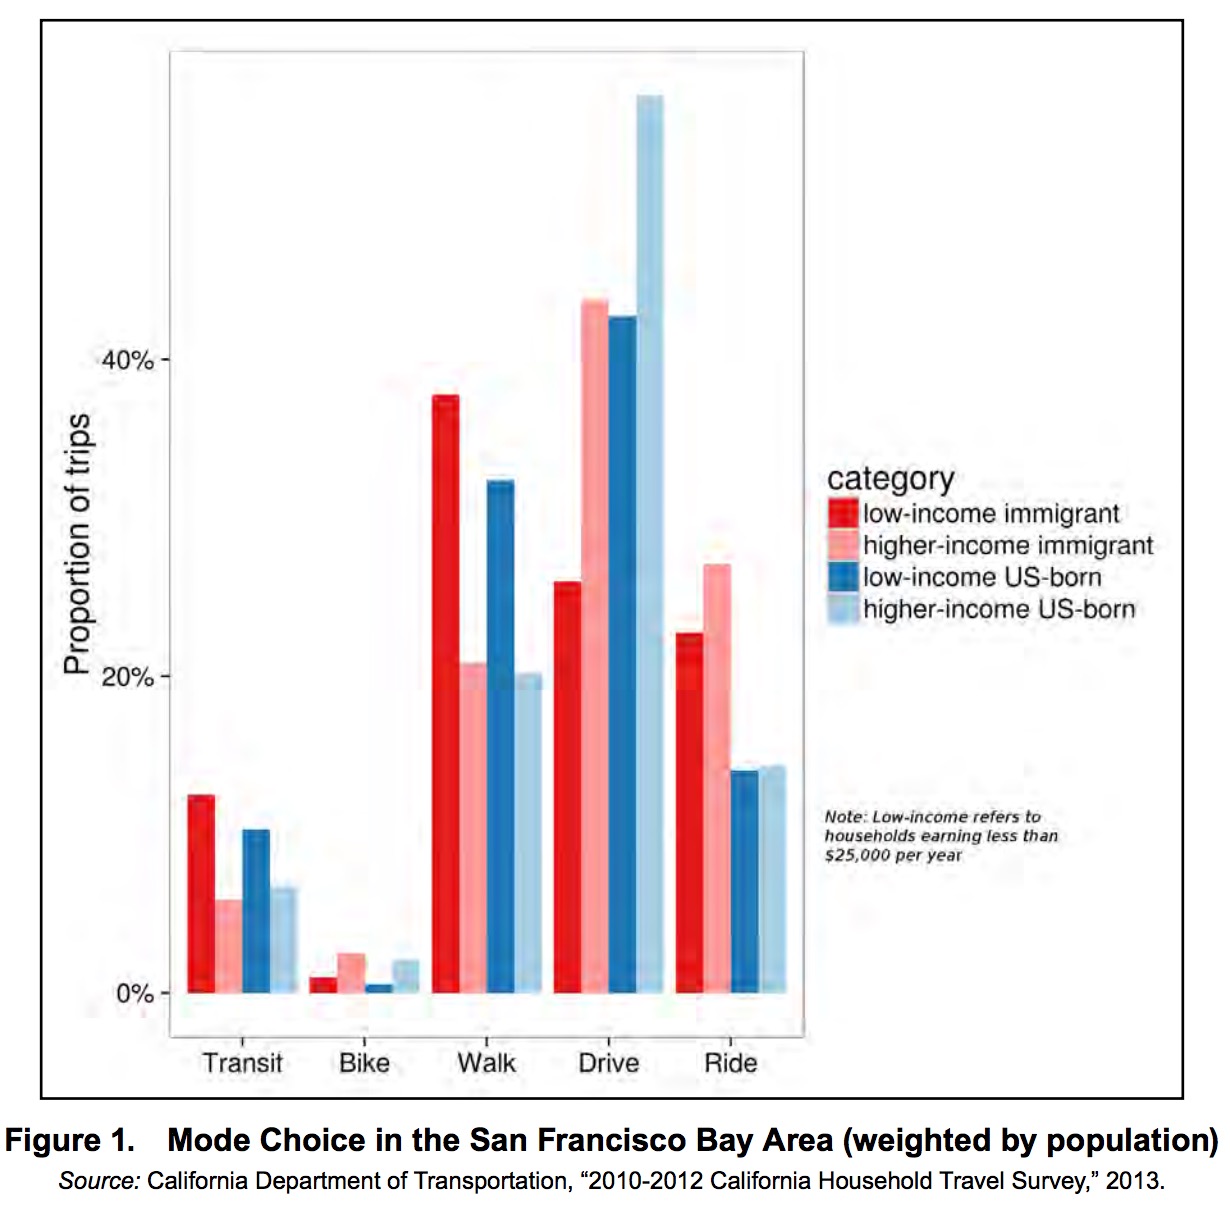 Figure 1. Mode Choice in the San Francisco Bay Area (weighted by population)